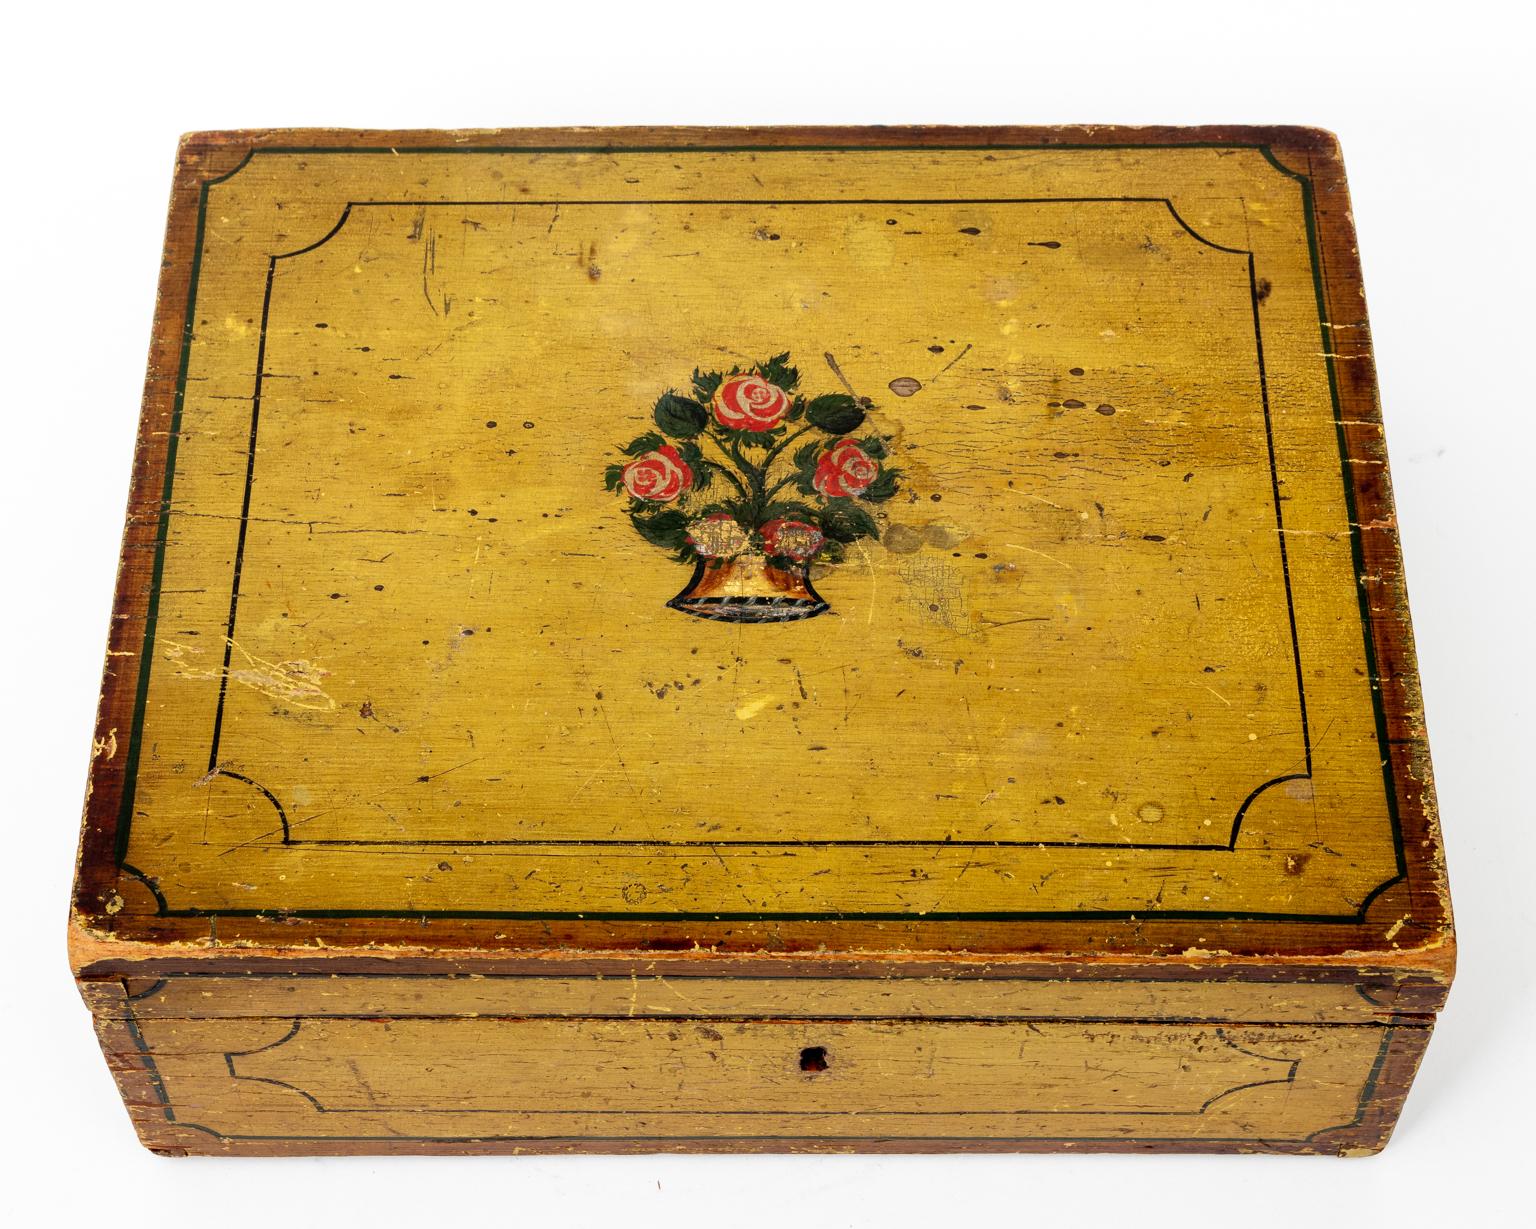 Circa 1825 pinewood American trinket box in original mustard yellow paint with painted linear trim on the exterior and a floral medallion on the lid. The piece also features foil lining on the interior. Made in the United States. Please note of wear